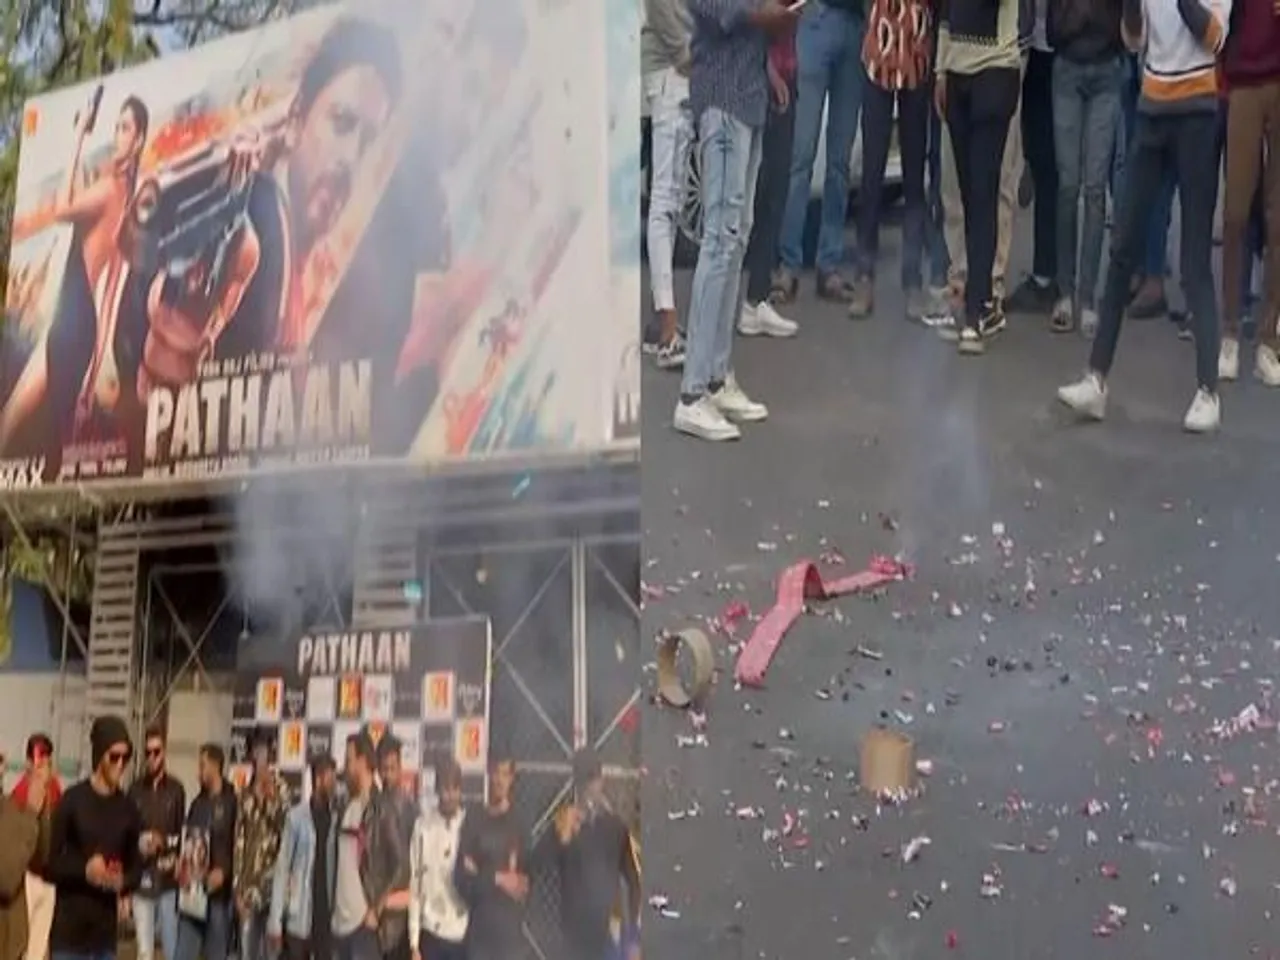 Fans celebrate 'Pathaan' release with firecrackers ​